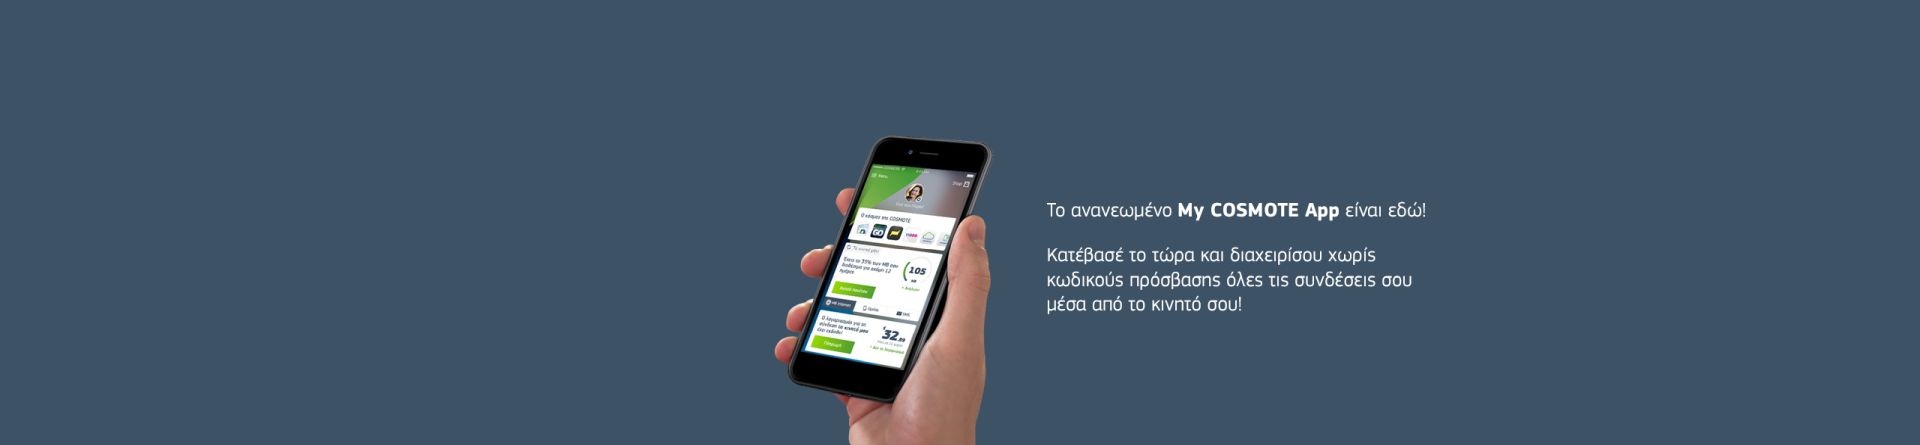 My COSMOTE App